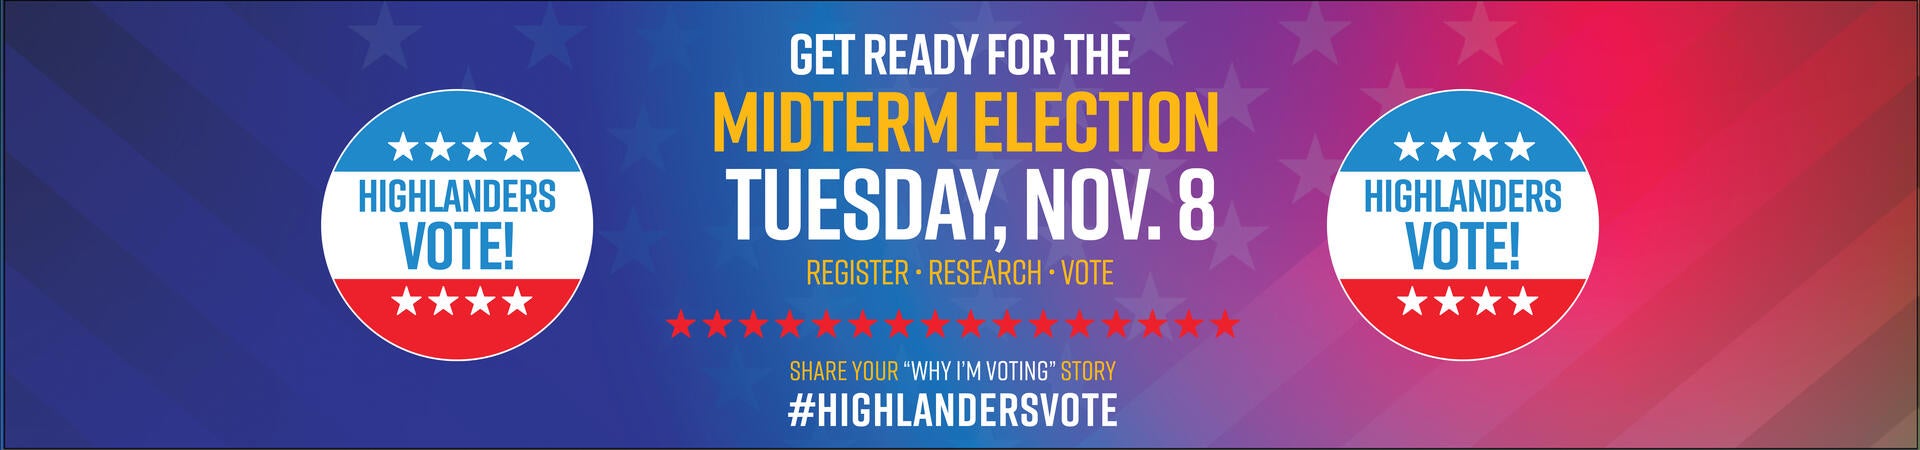 Get ready for the midterm elections Tuesday, Nov. 8